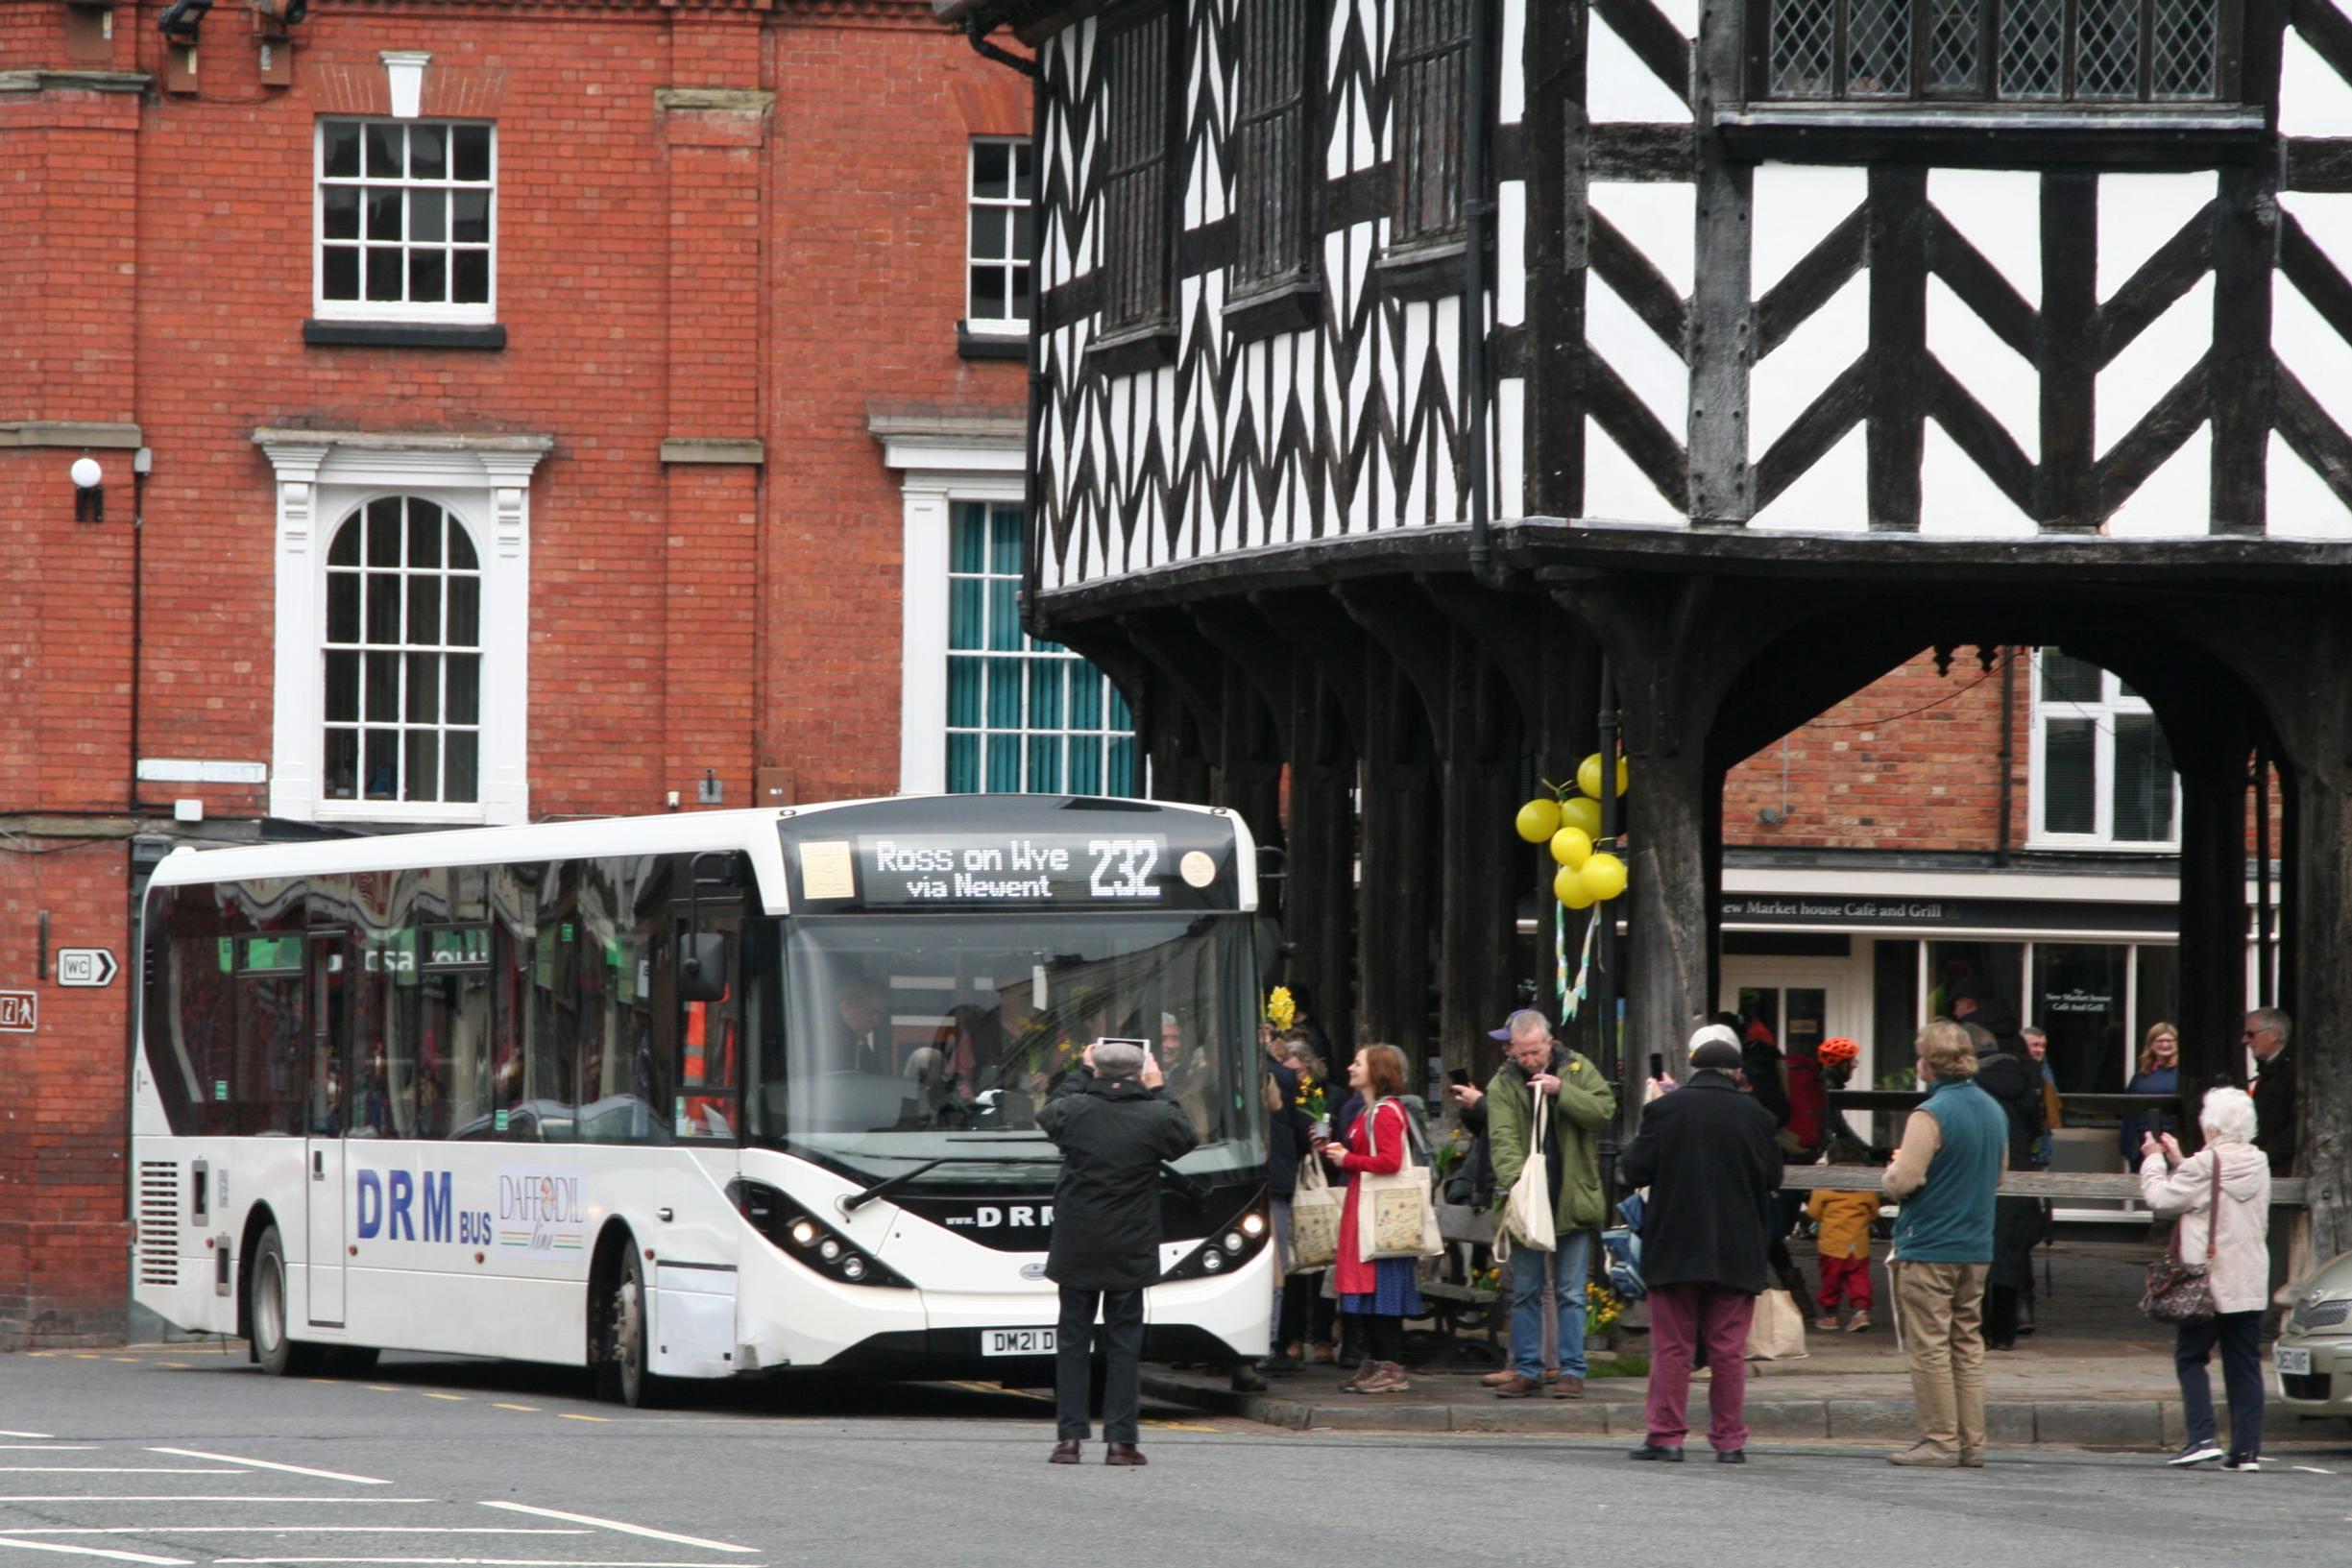 Passengers boarding the 232 bus at Cantilupe Road, Ross-on-Wye